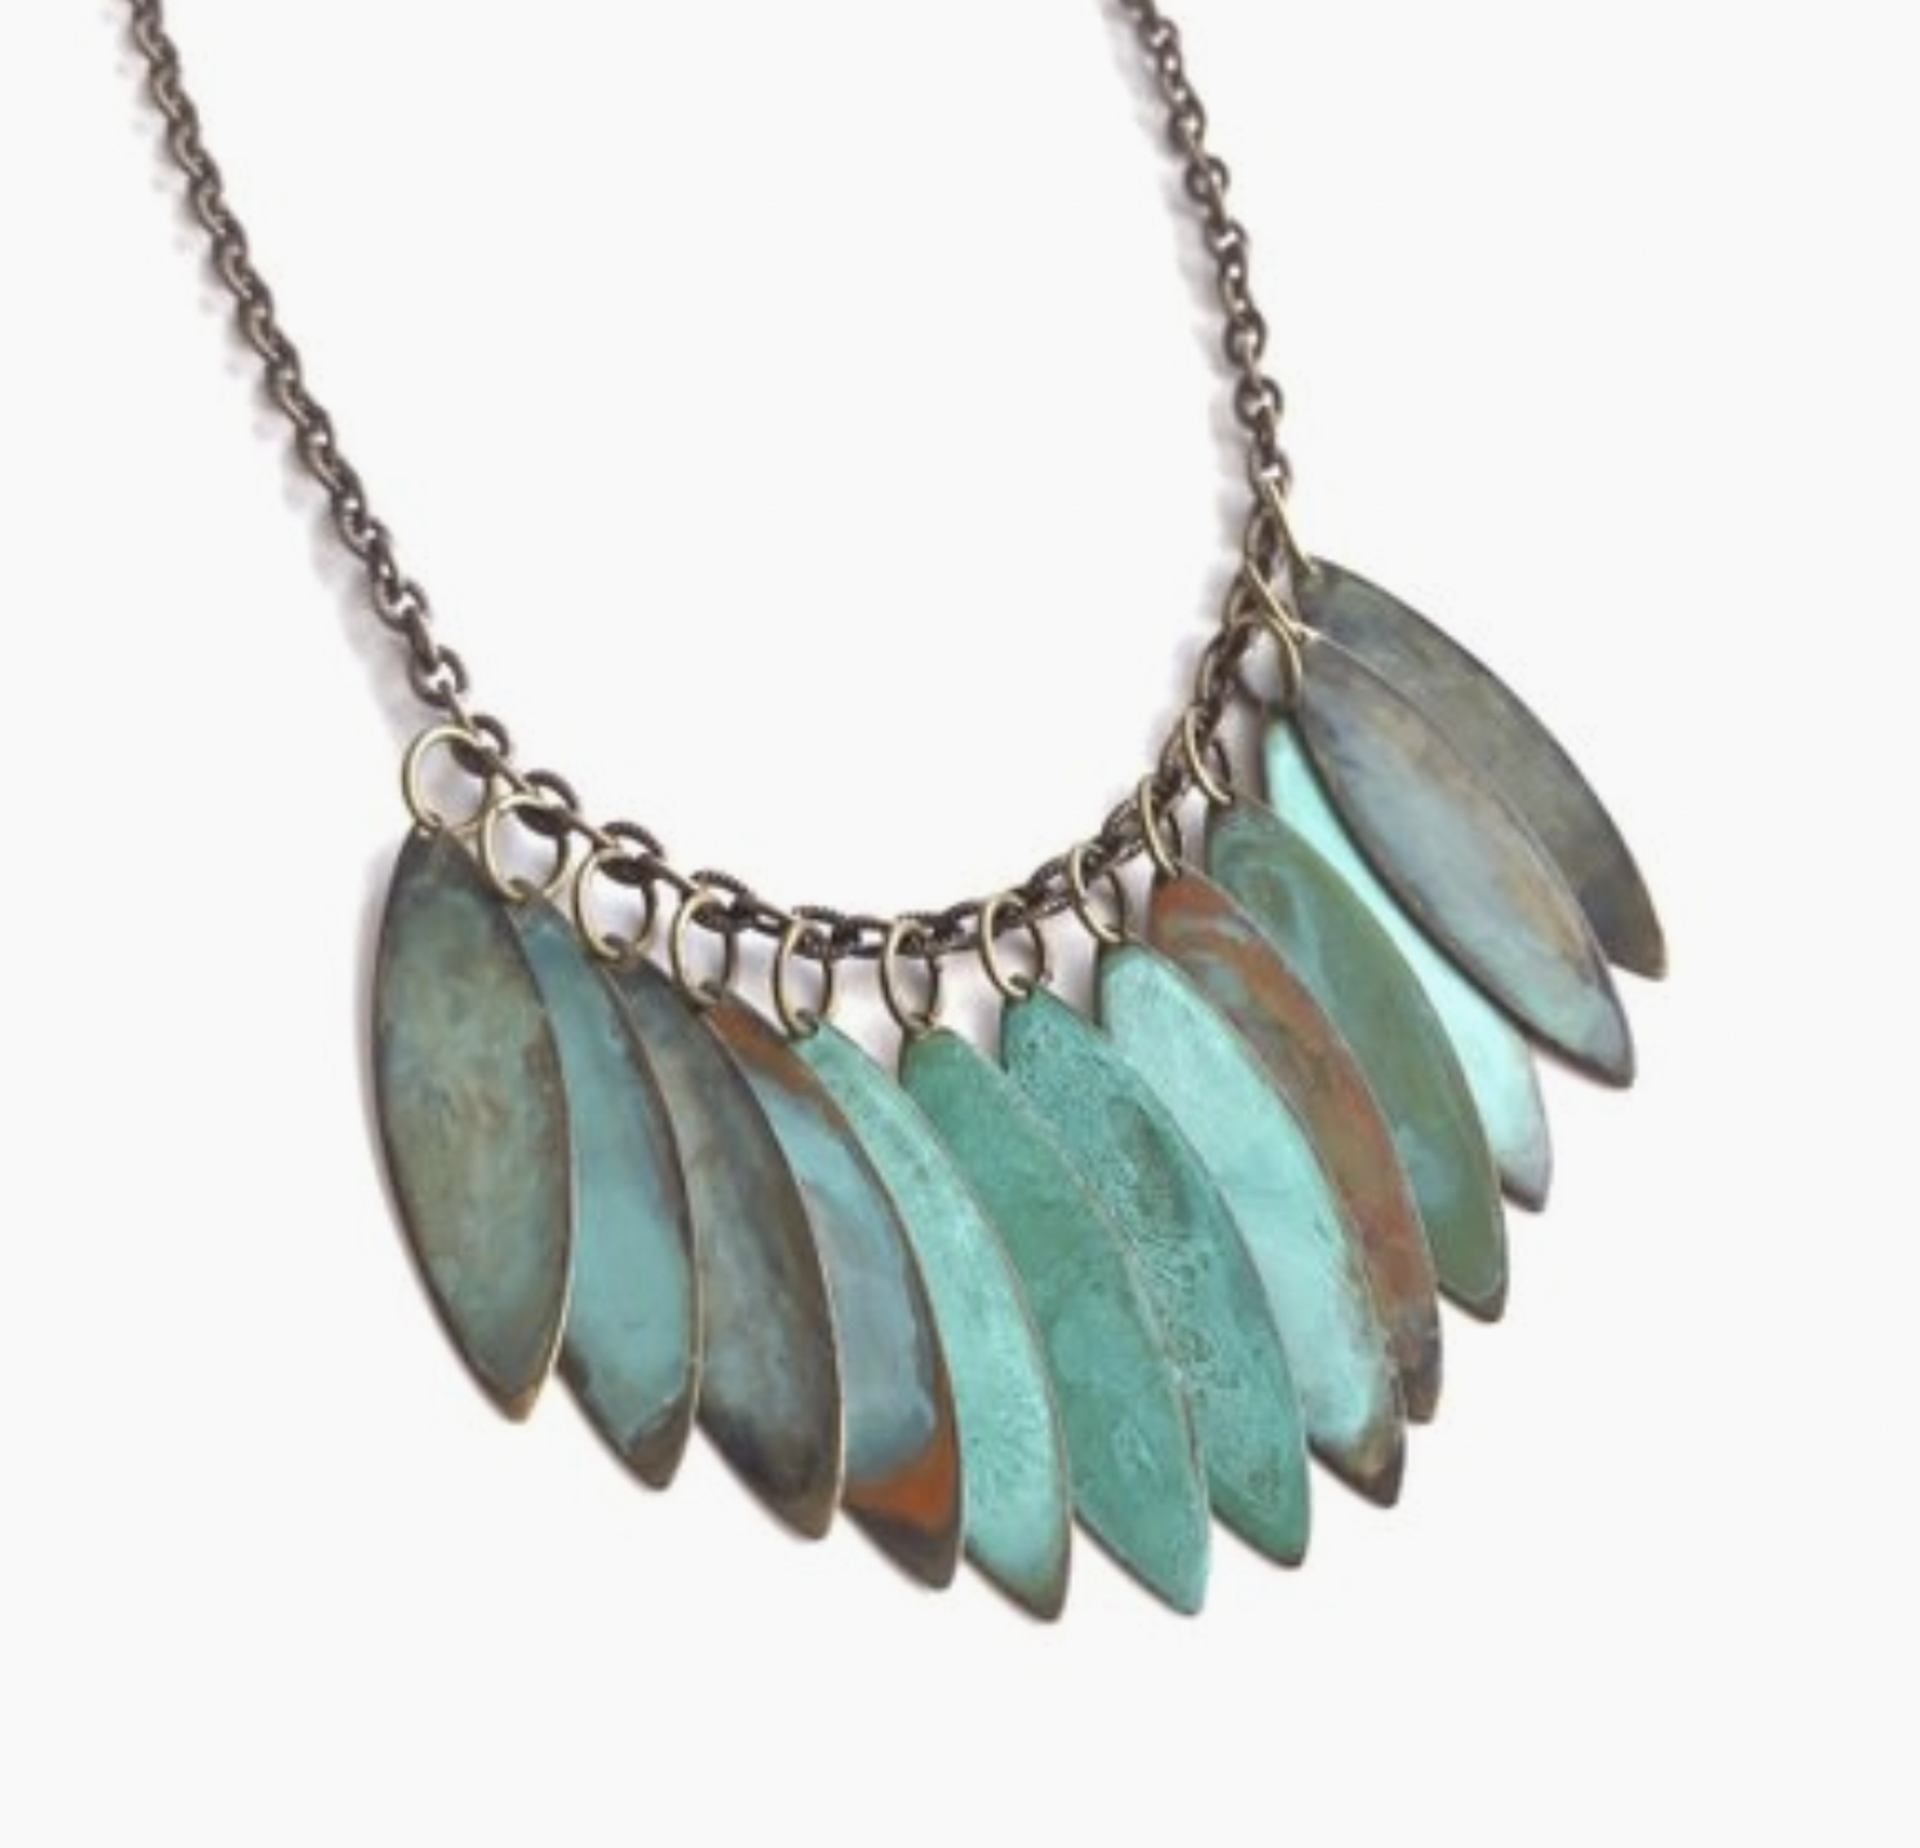 Small Verdigris Leaf Necklace by ssd jewelry